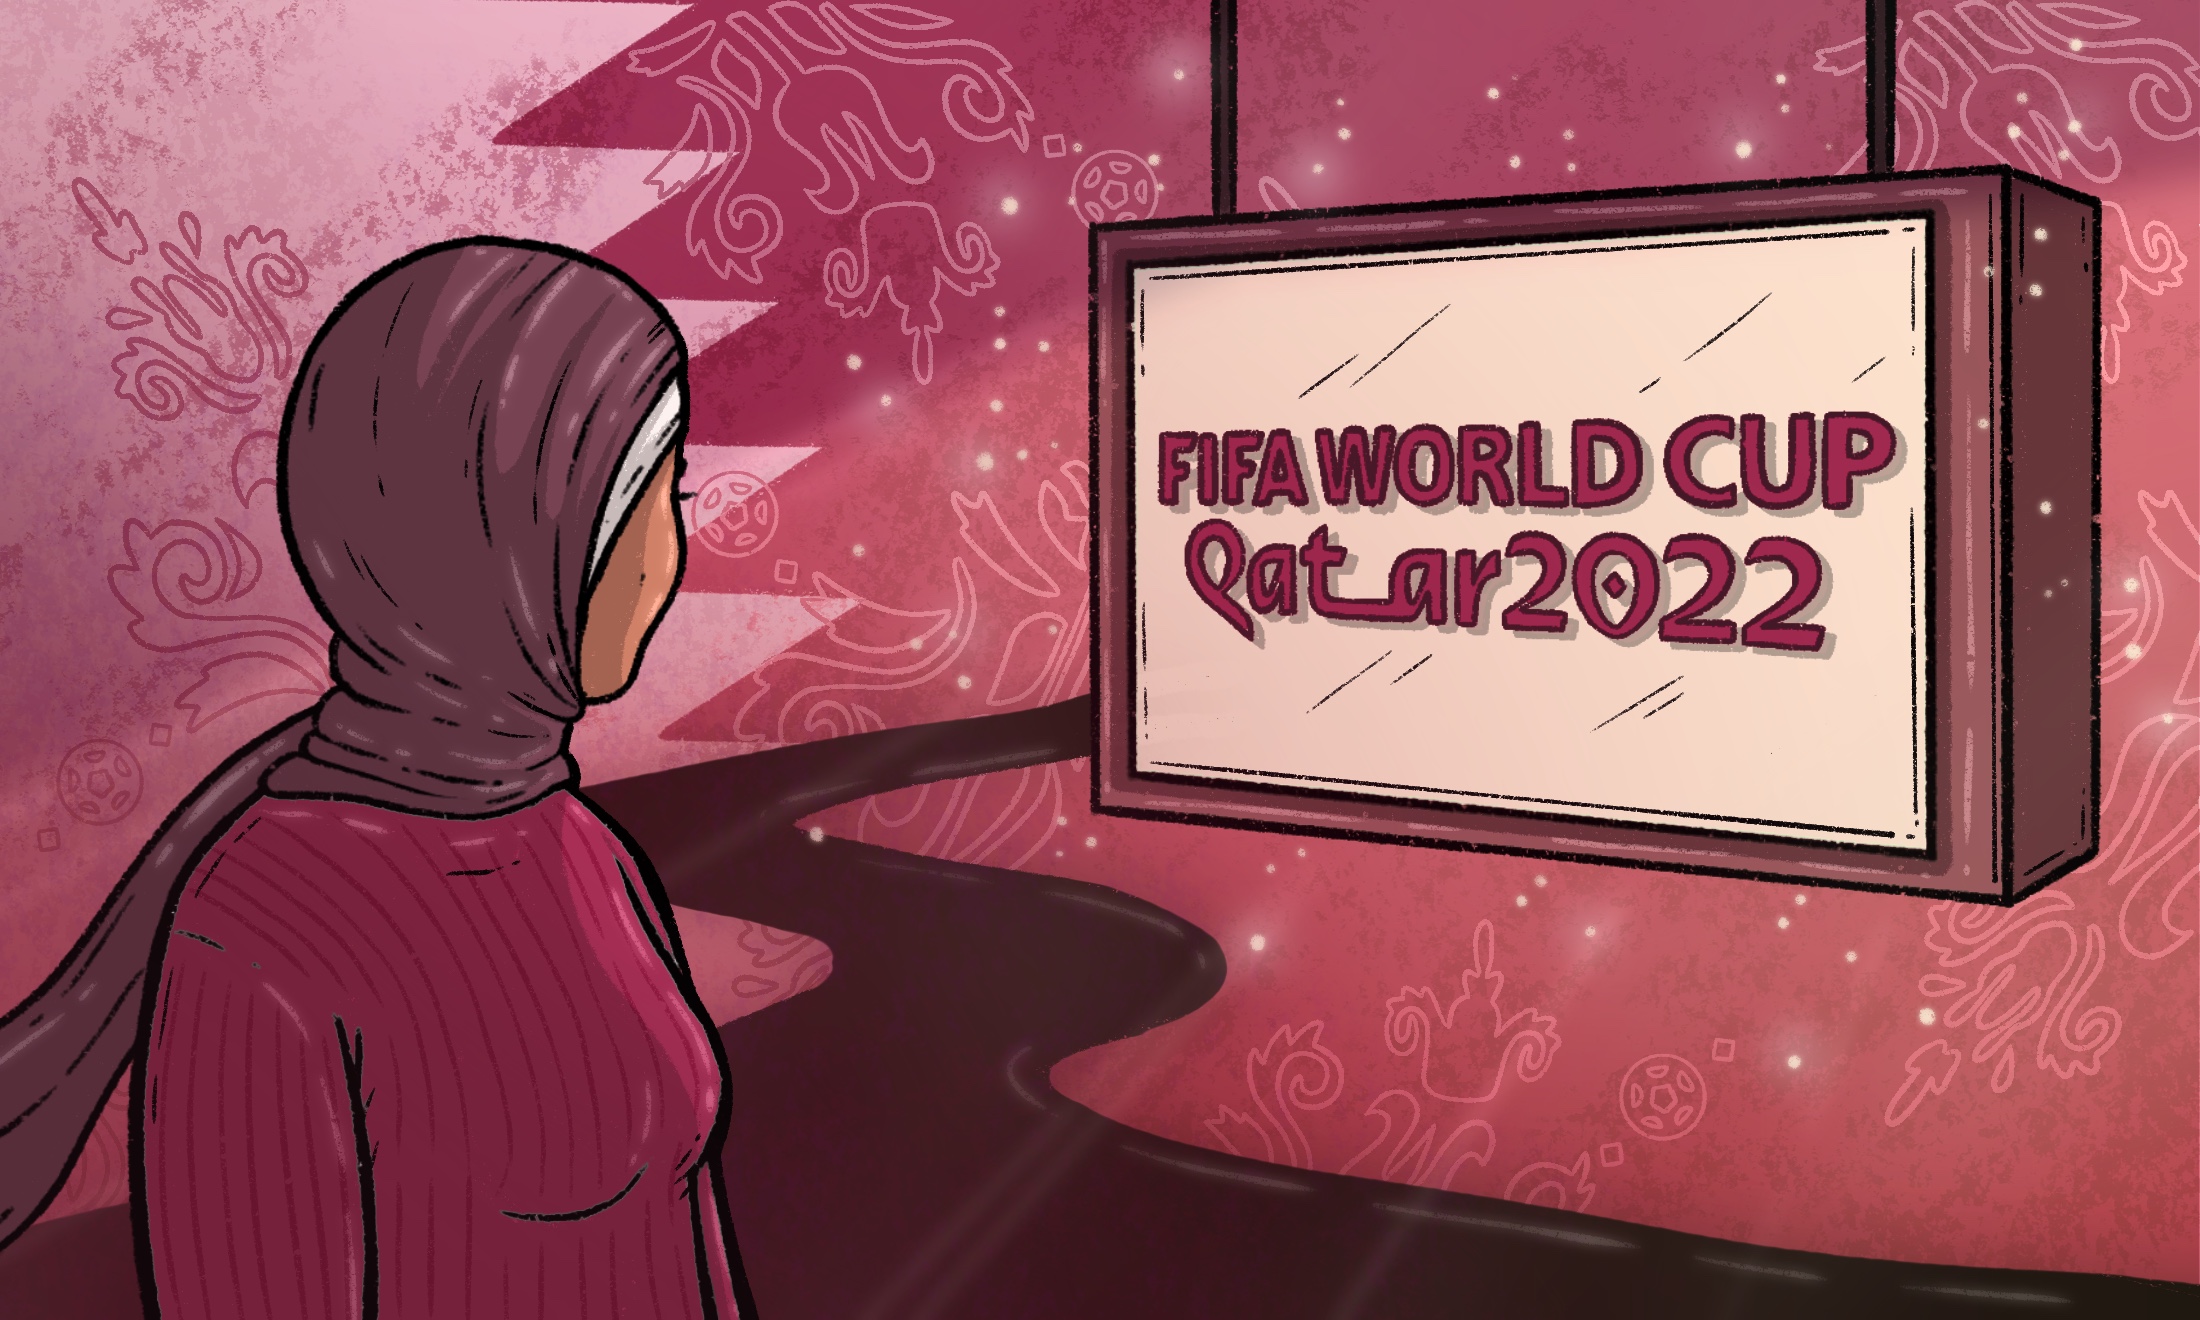 I didn’t receive justice when I was assaulted in Qatar. This year’s World Cup has reopened painful memories